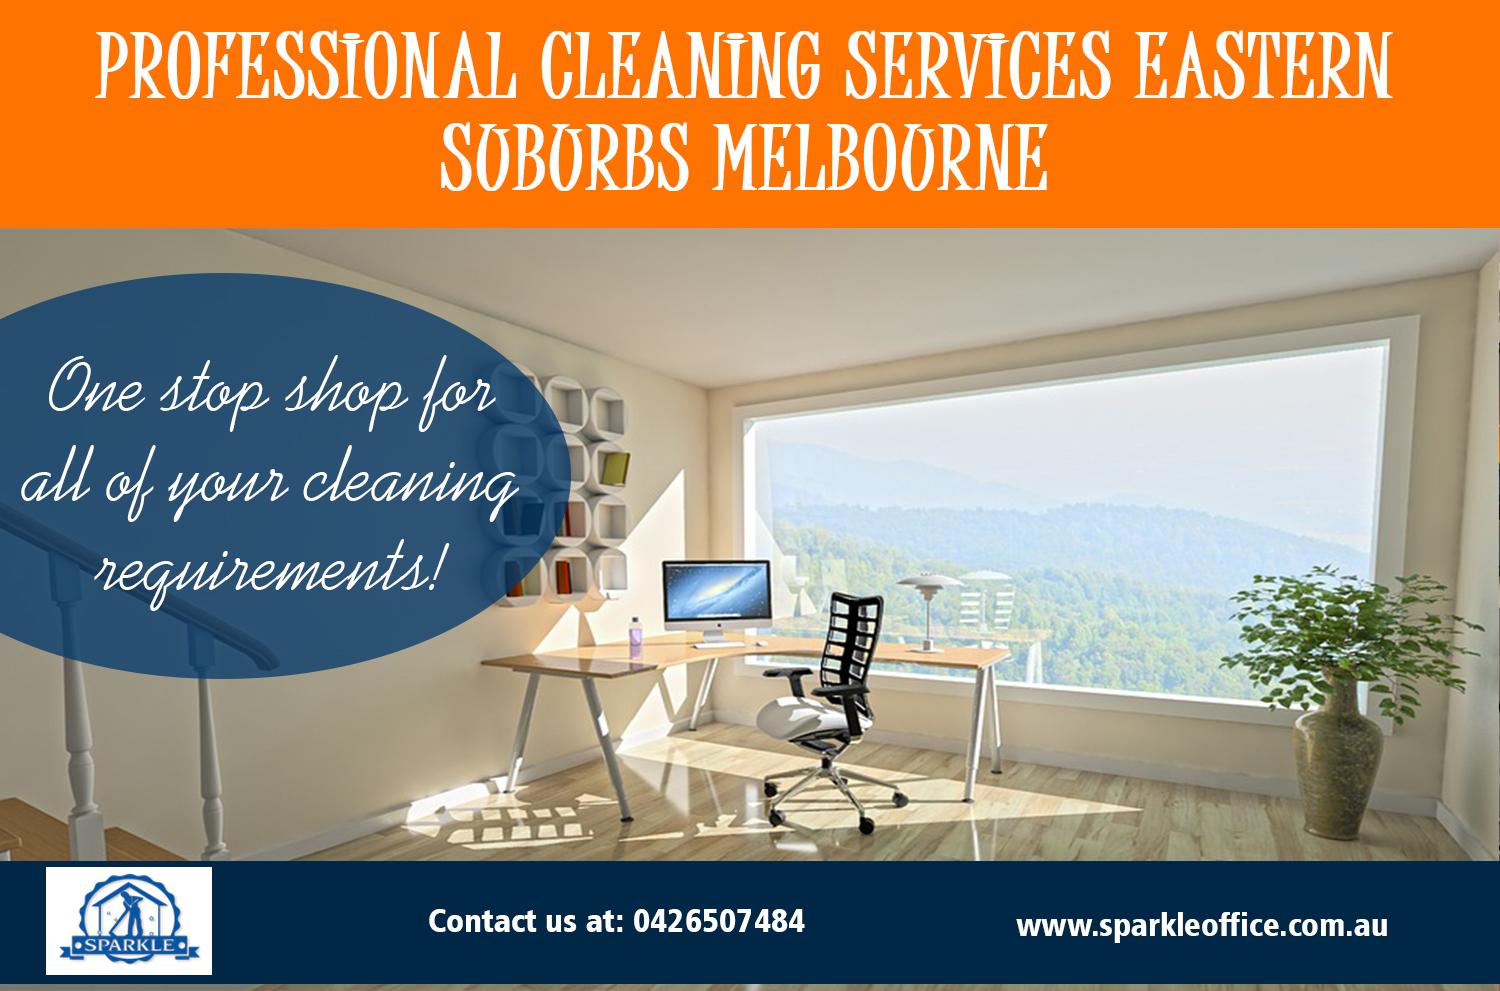 Professional Cleaning Services eastern suburbs Melbourne